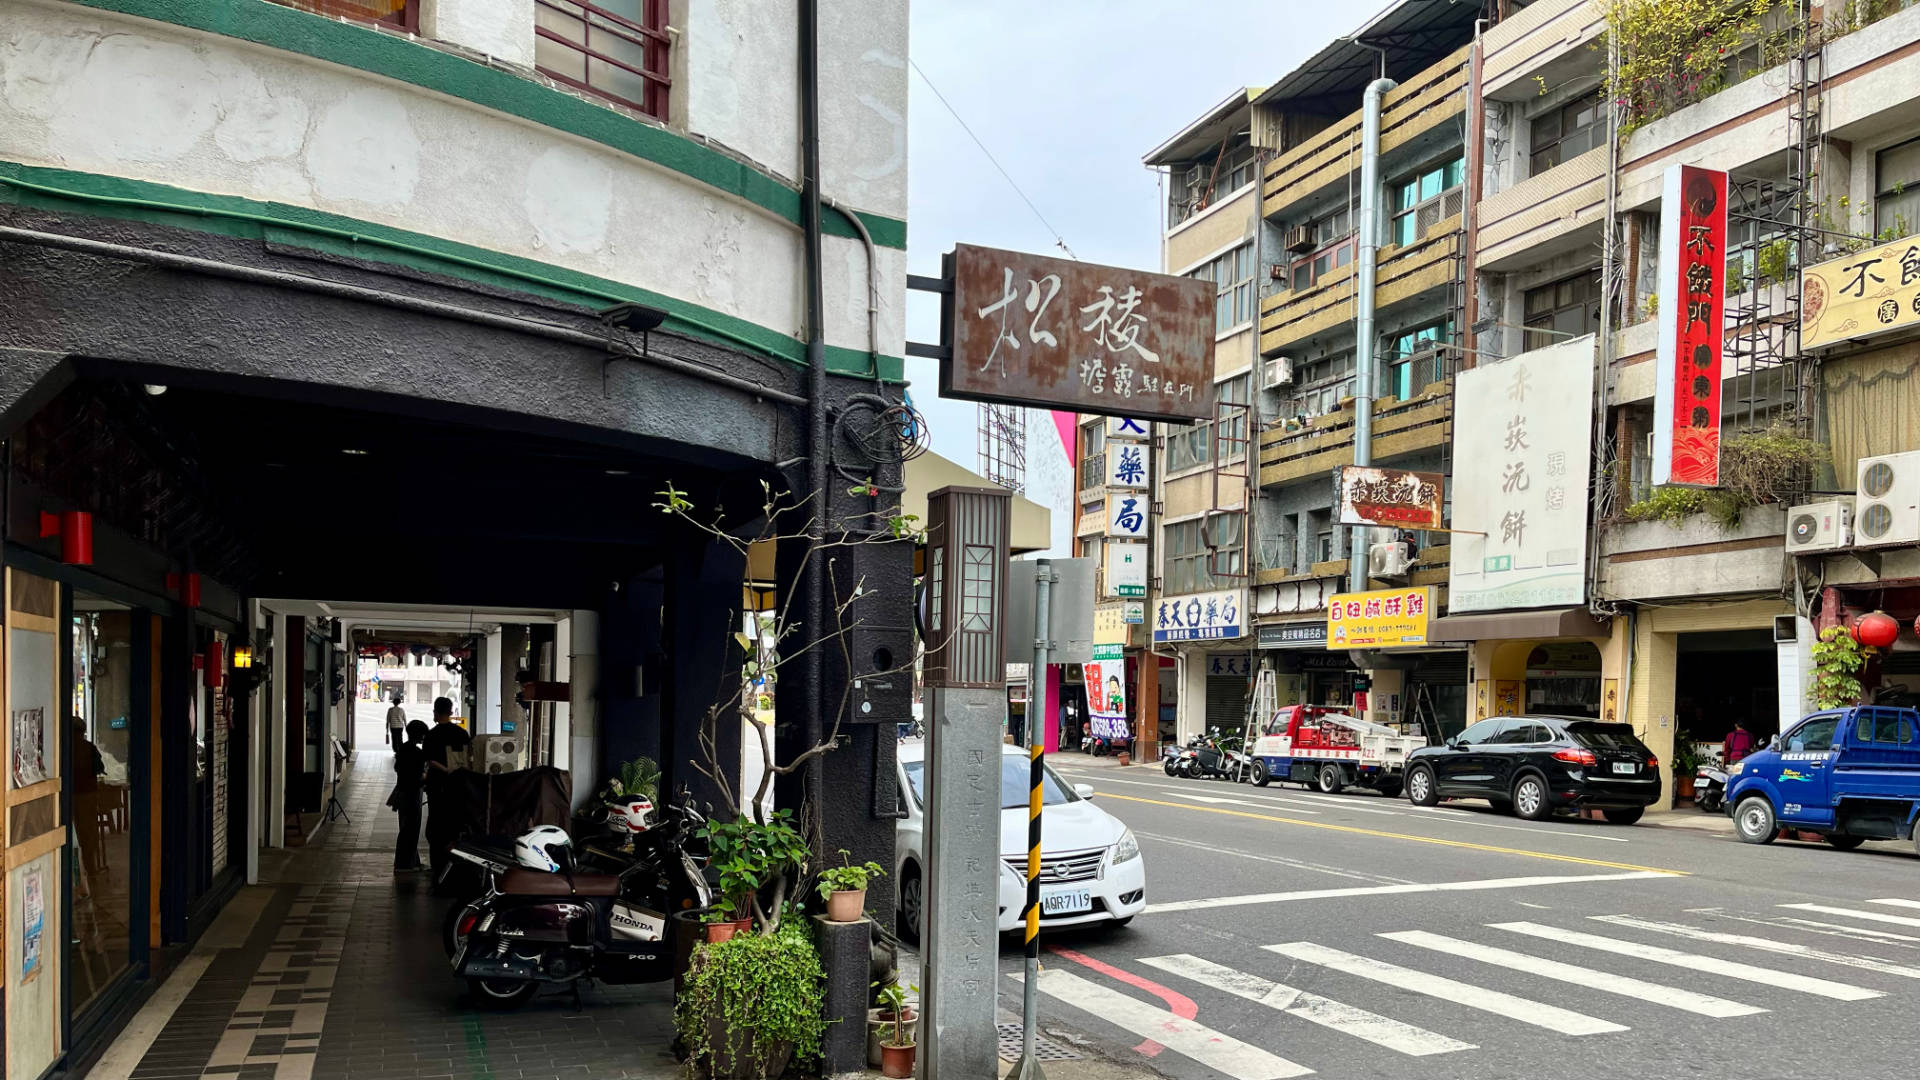 A typical side street in Tainan.